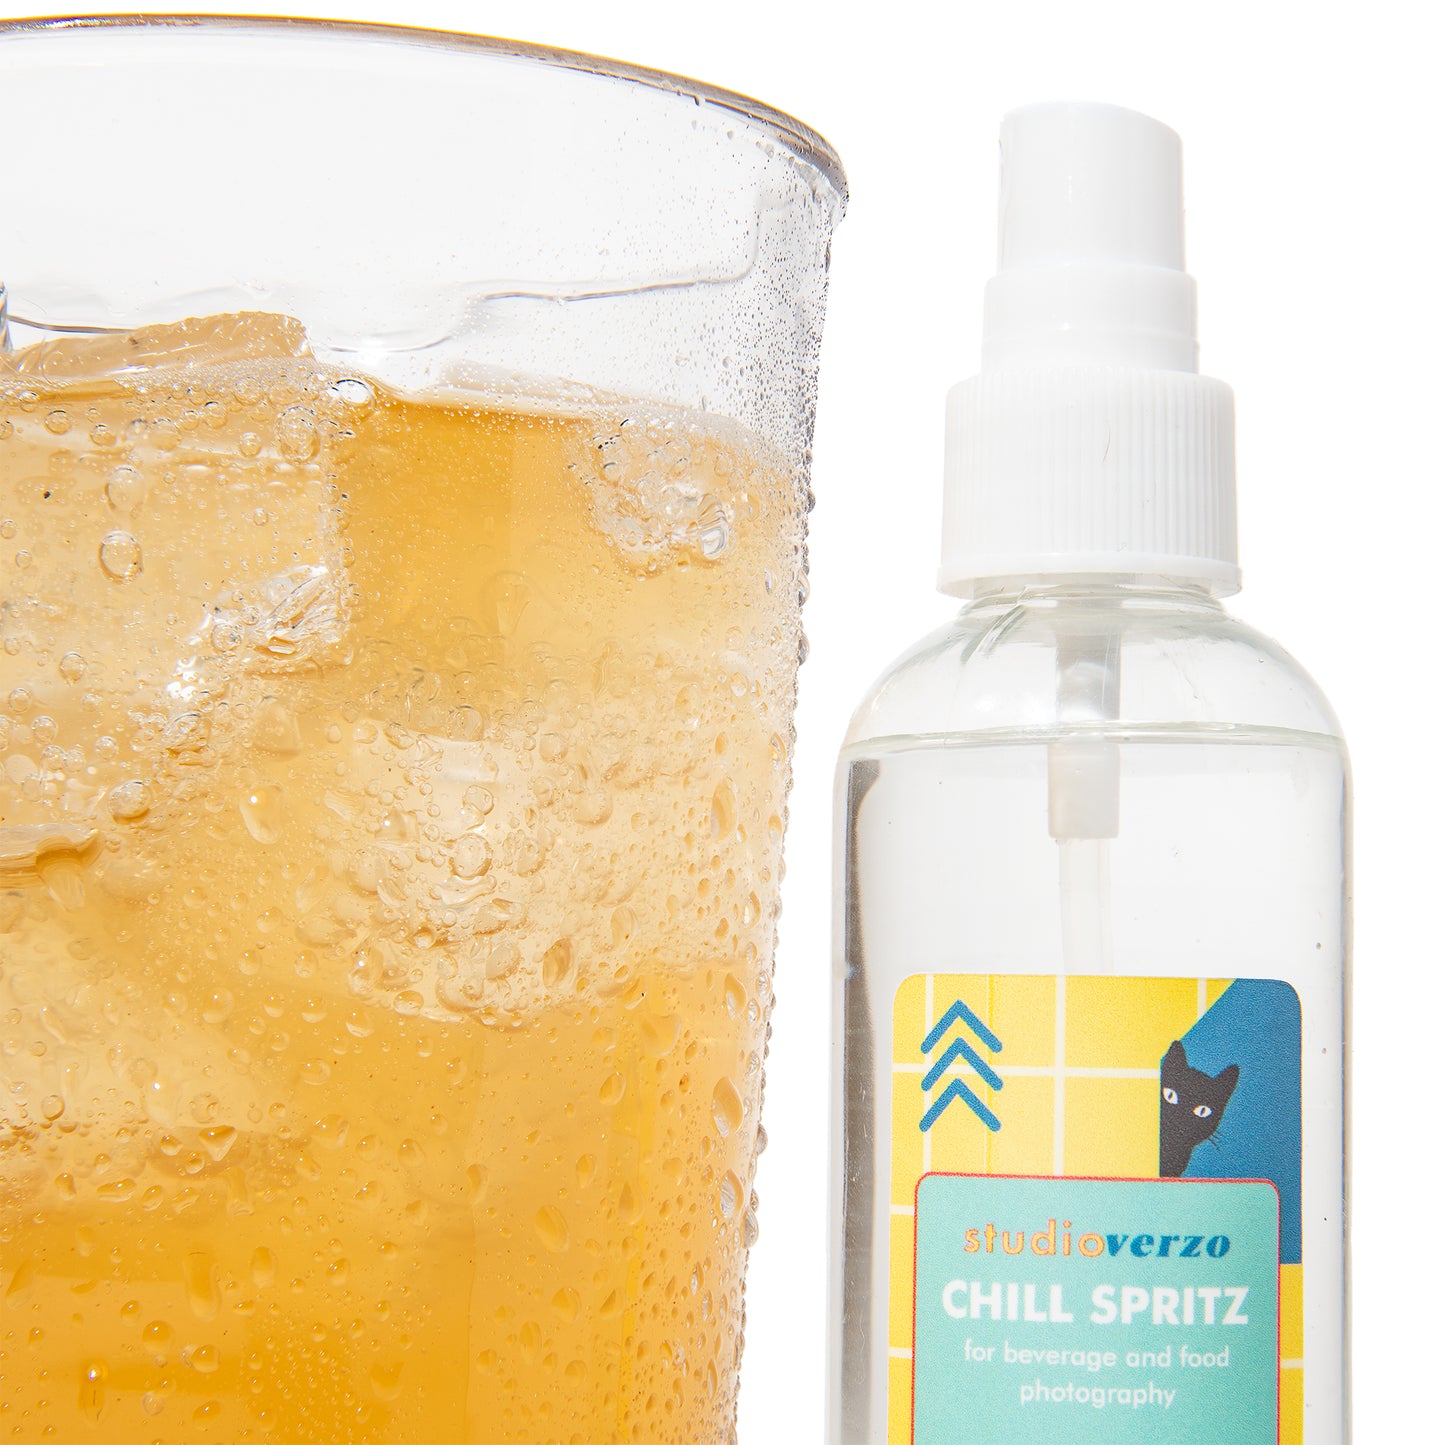 Chill Spritz for Food & Beverage Photography